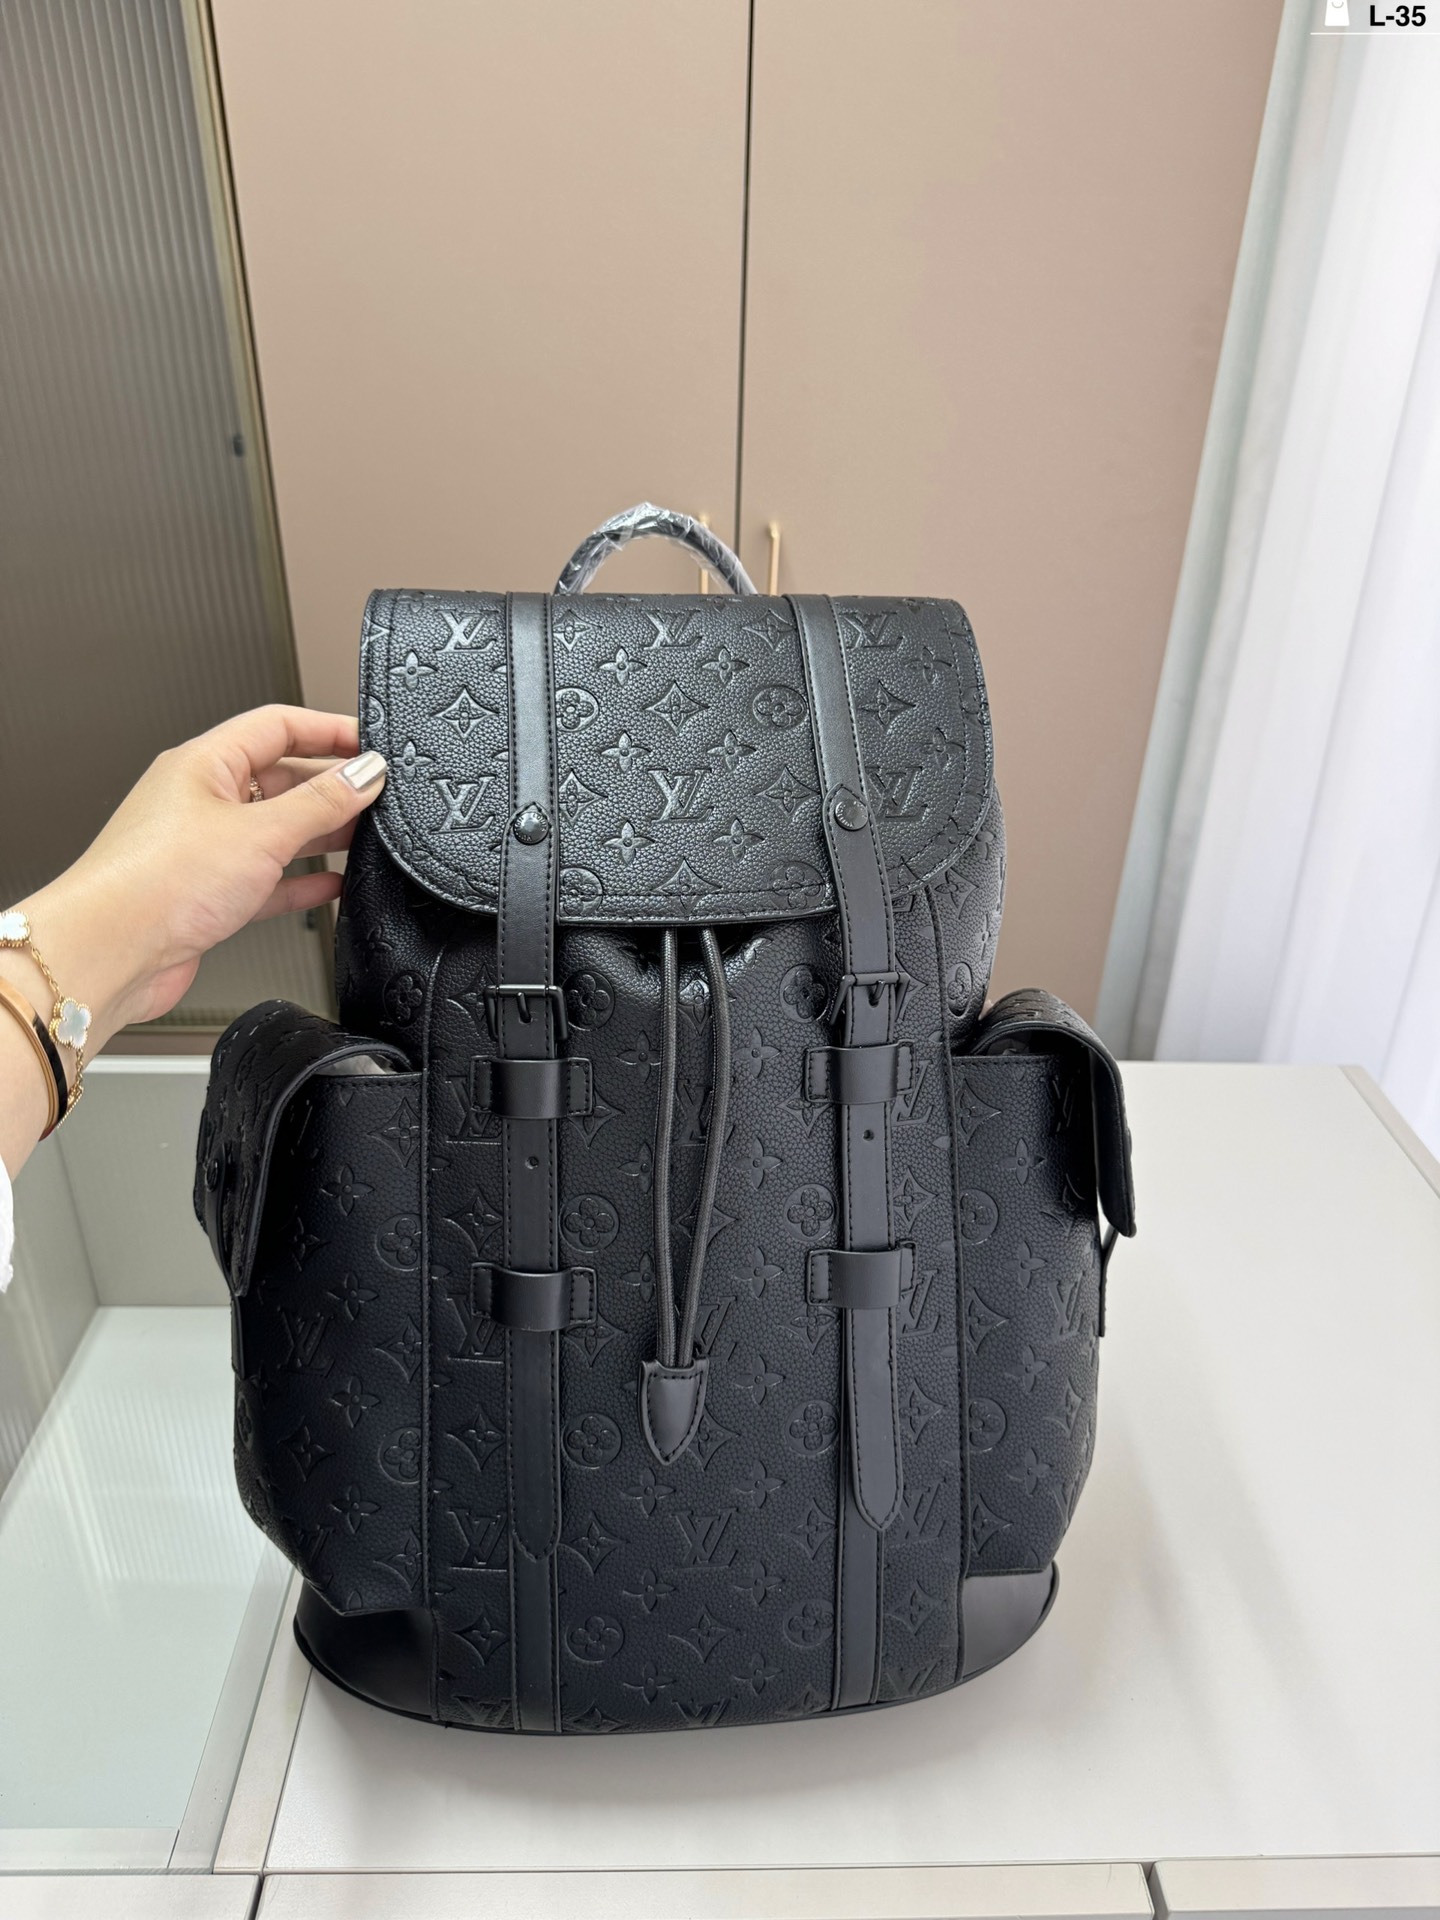 L style printed backpack